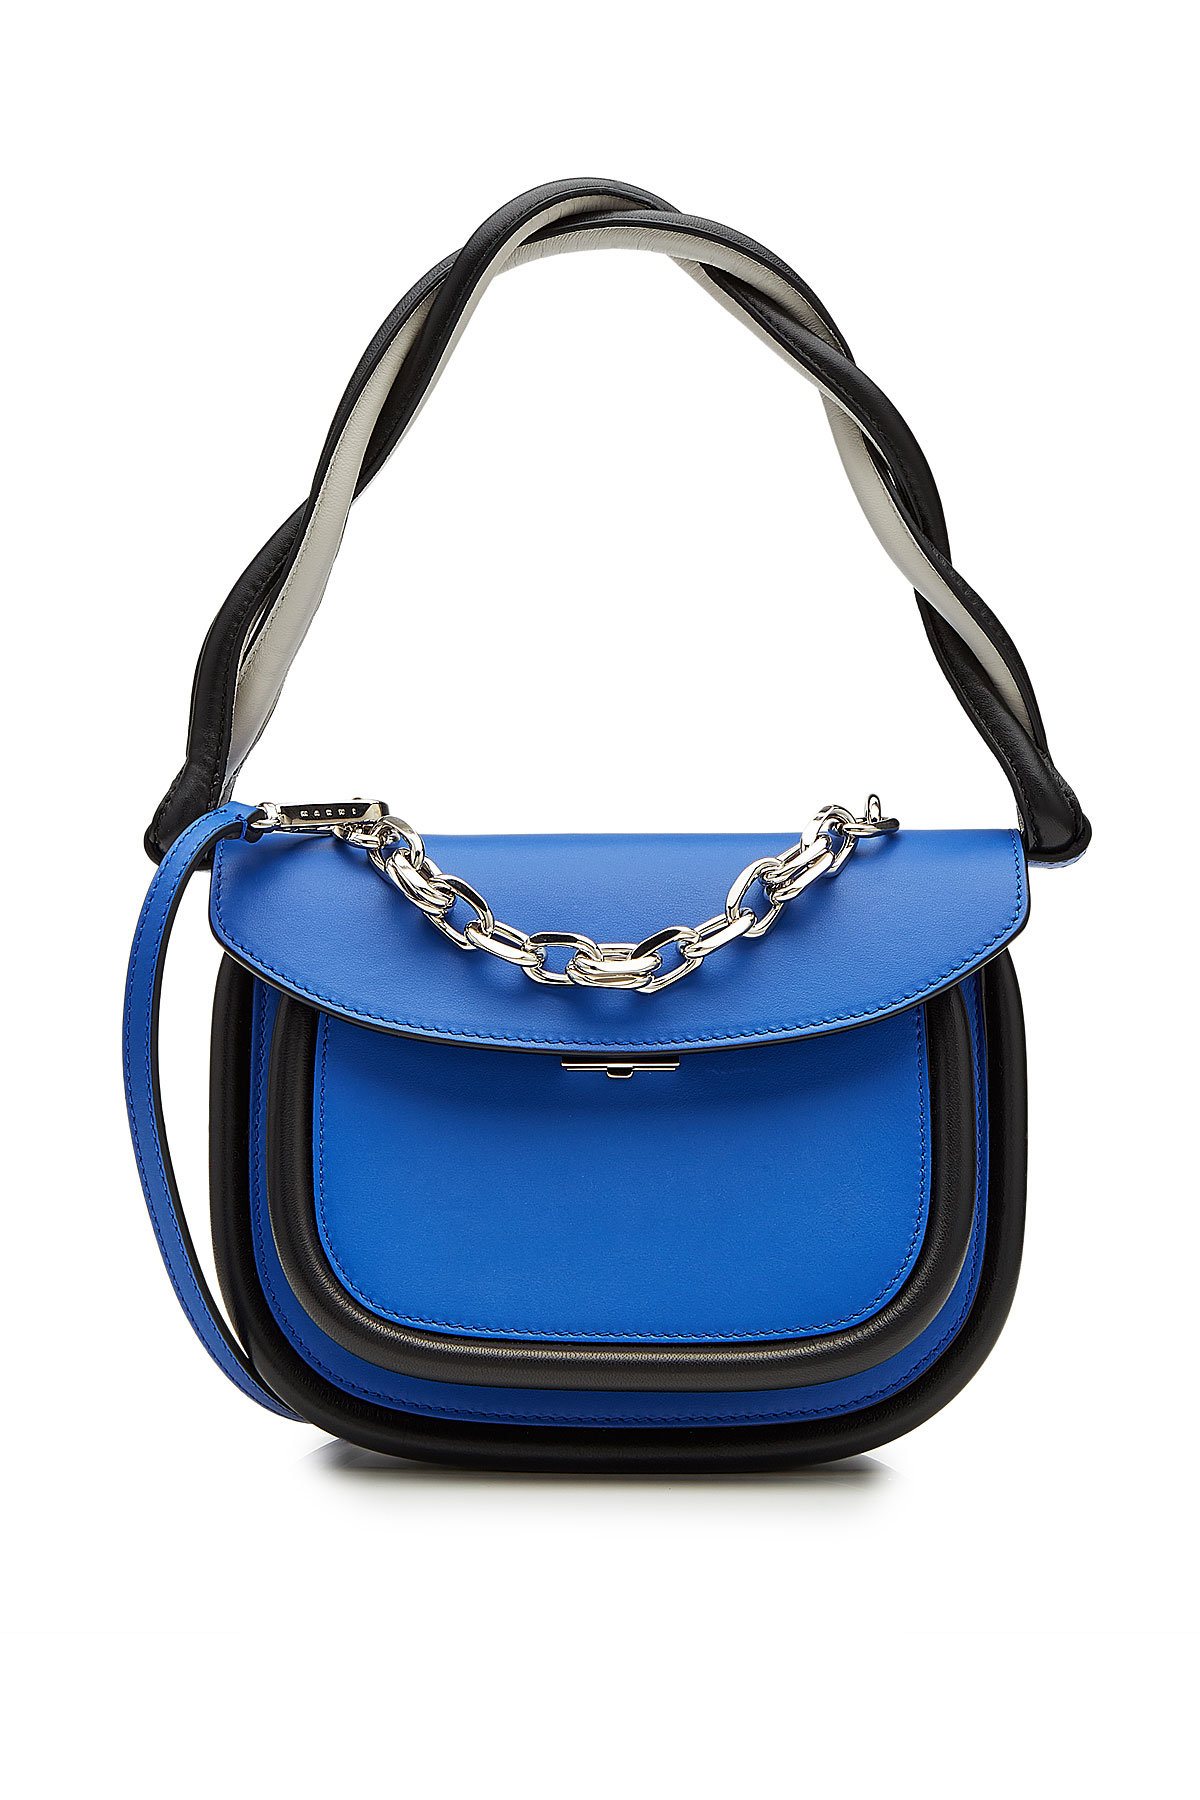 Marni - Leather Shoulder Bag with Chain Embellishment